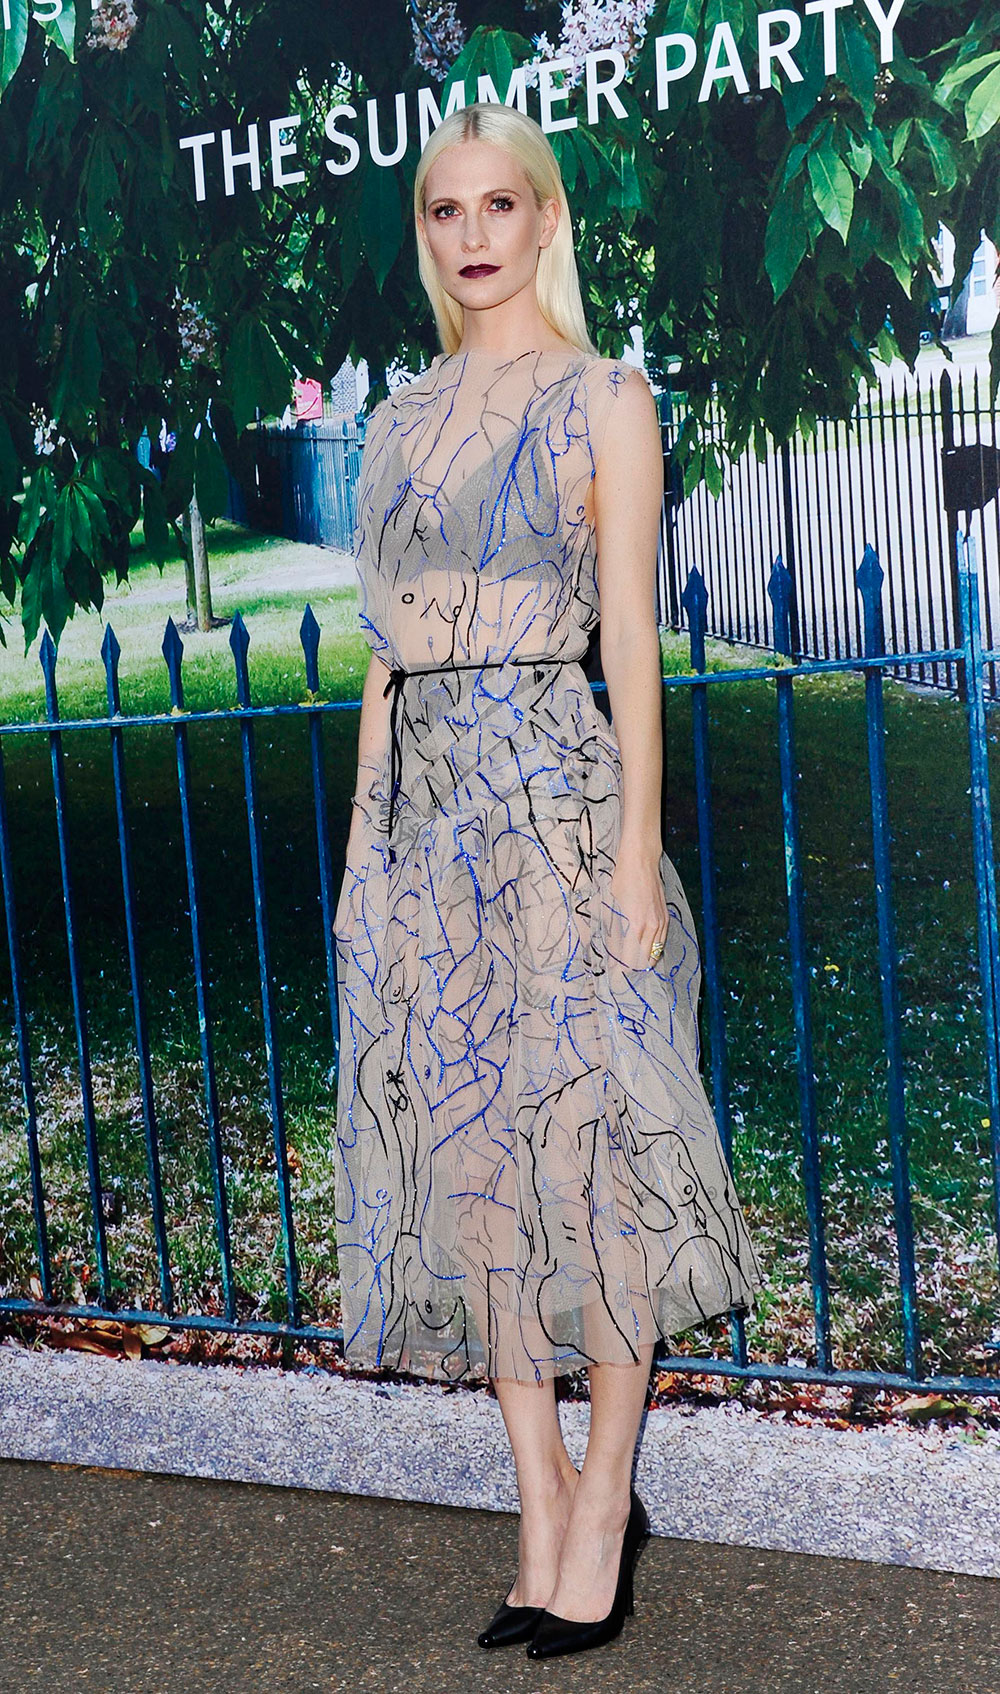 Poppy Delevingne at The Serpentine Gallery summer party